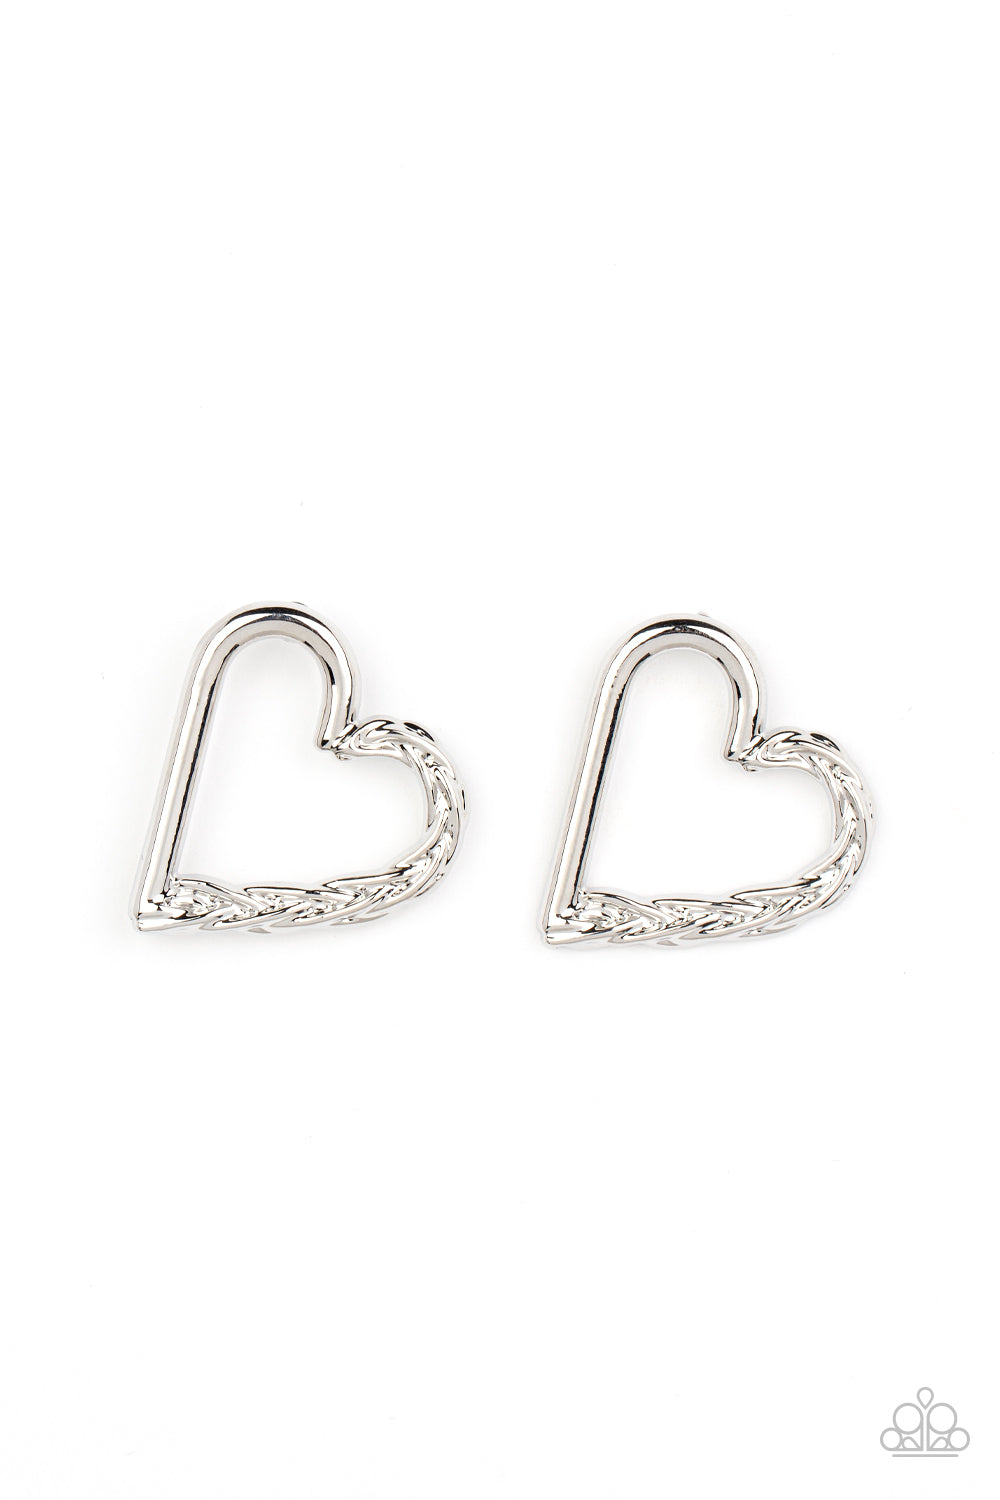 Paparazzi Cupid, Who? - Silver Earrings - A Finishing Touch Jewelry